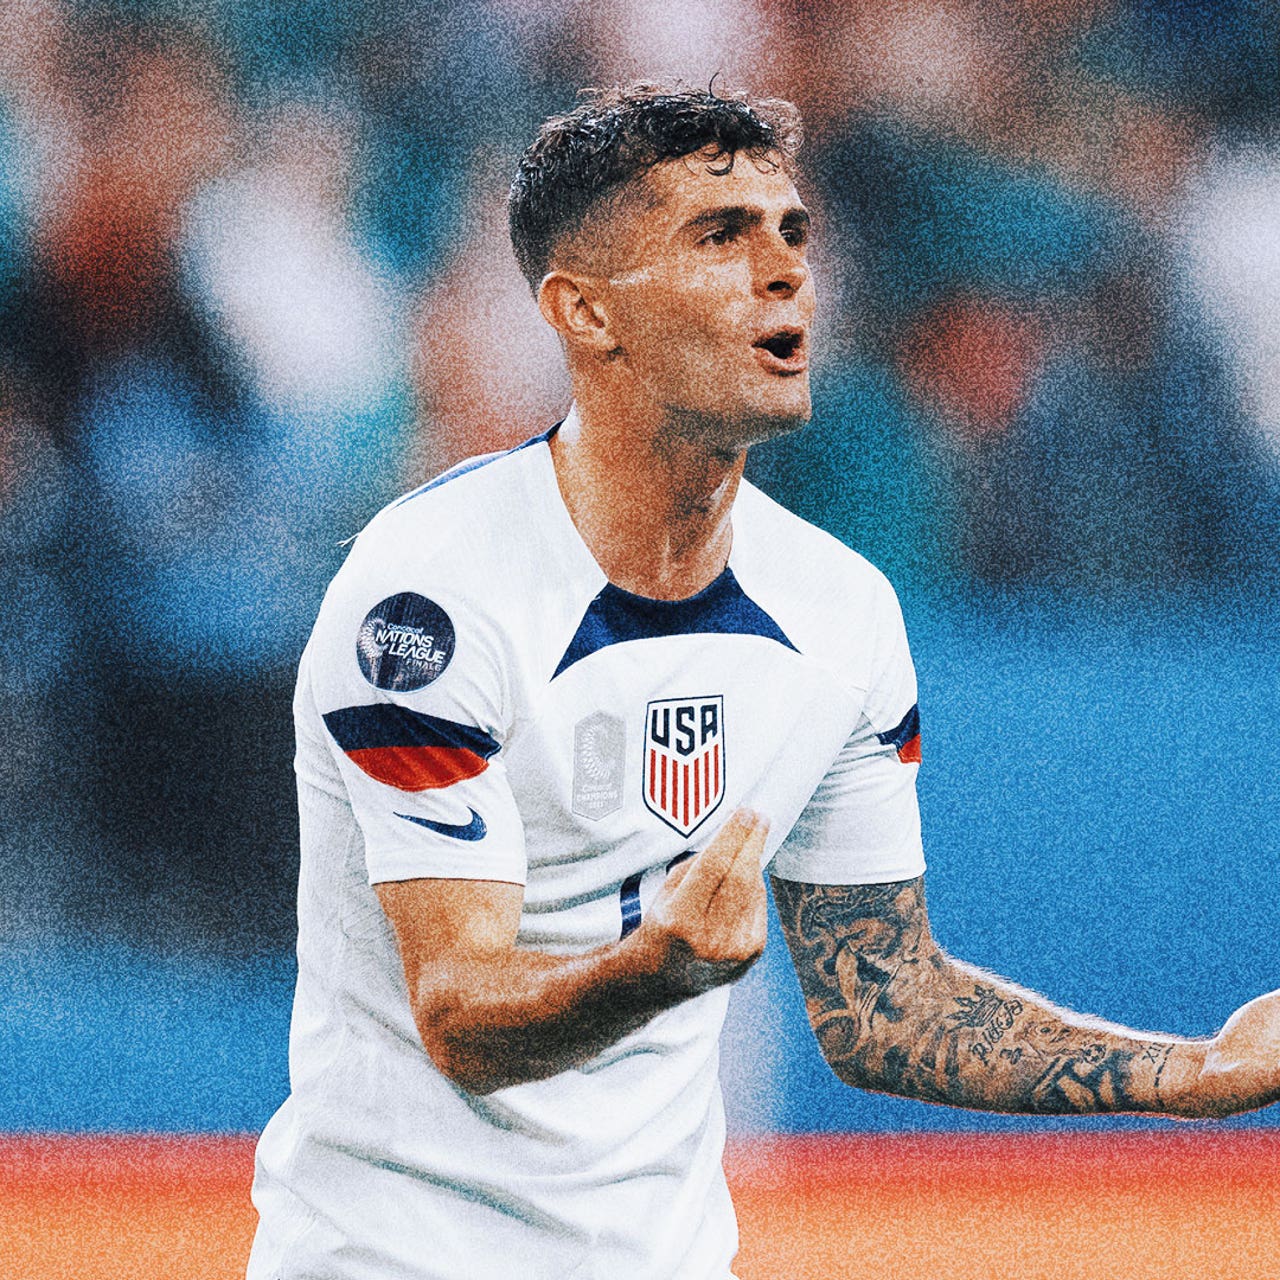 USA vs. Cuba, CONCACAF Nations League group stage: What to watch for -  Stars and Stripes FC